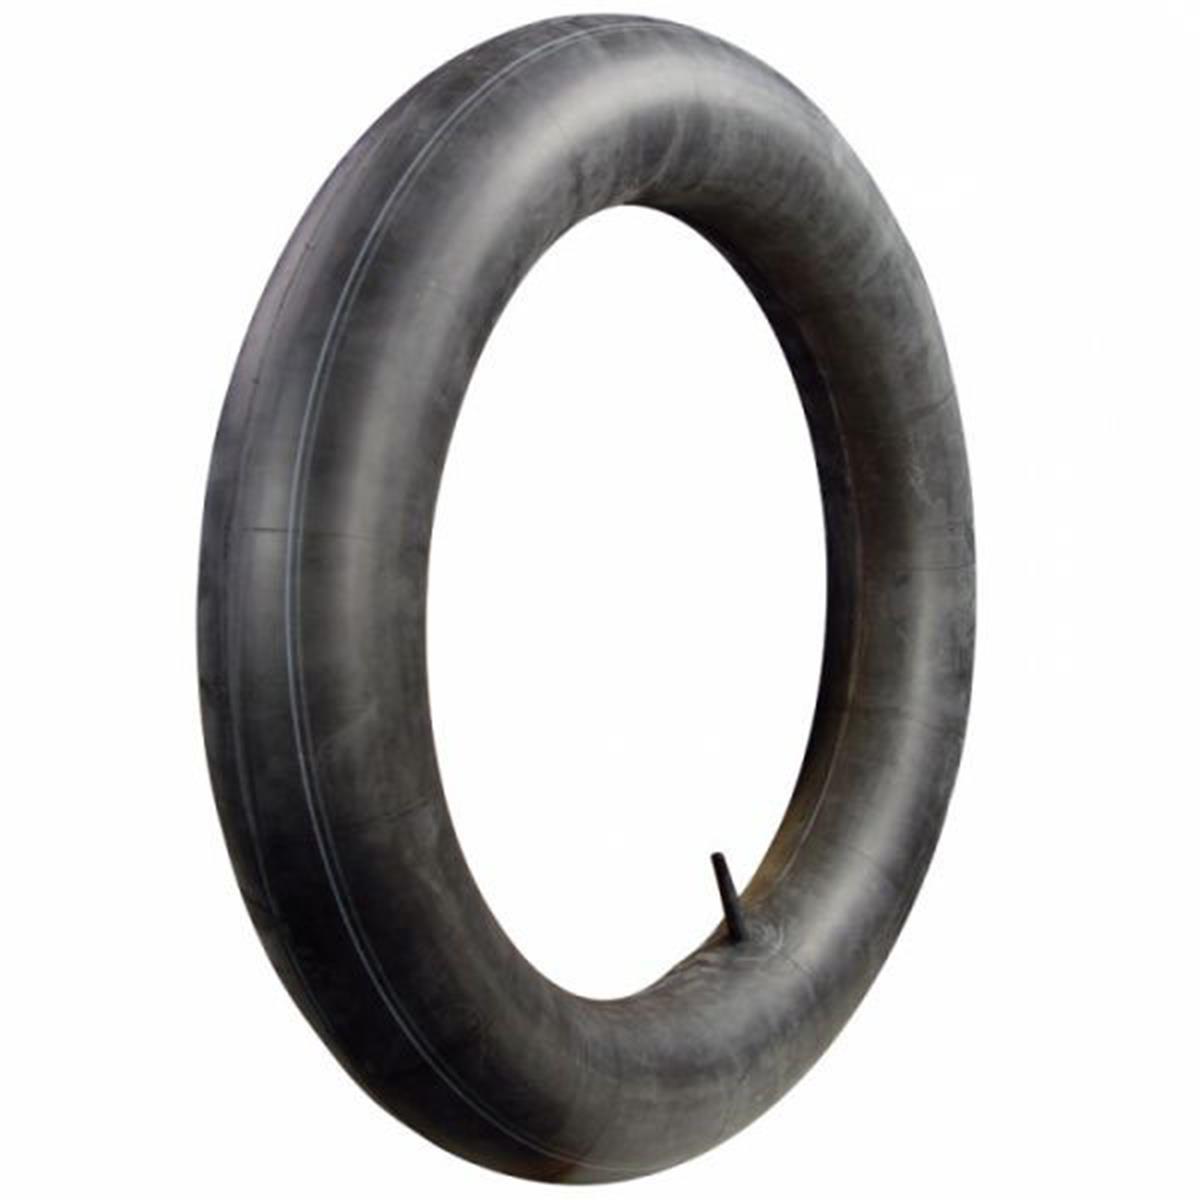 Gibson Super Heavy Duty 4 mm thick, 110/80-18, 120/80-18, 110/100-18, 120/100-18